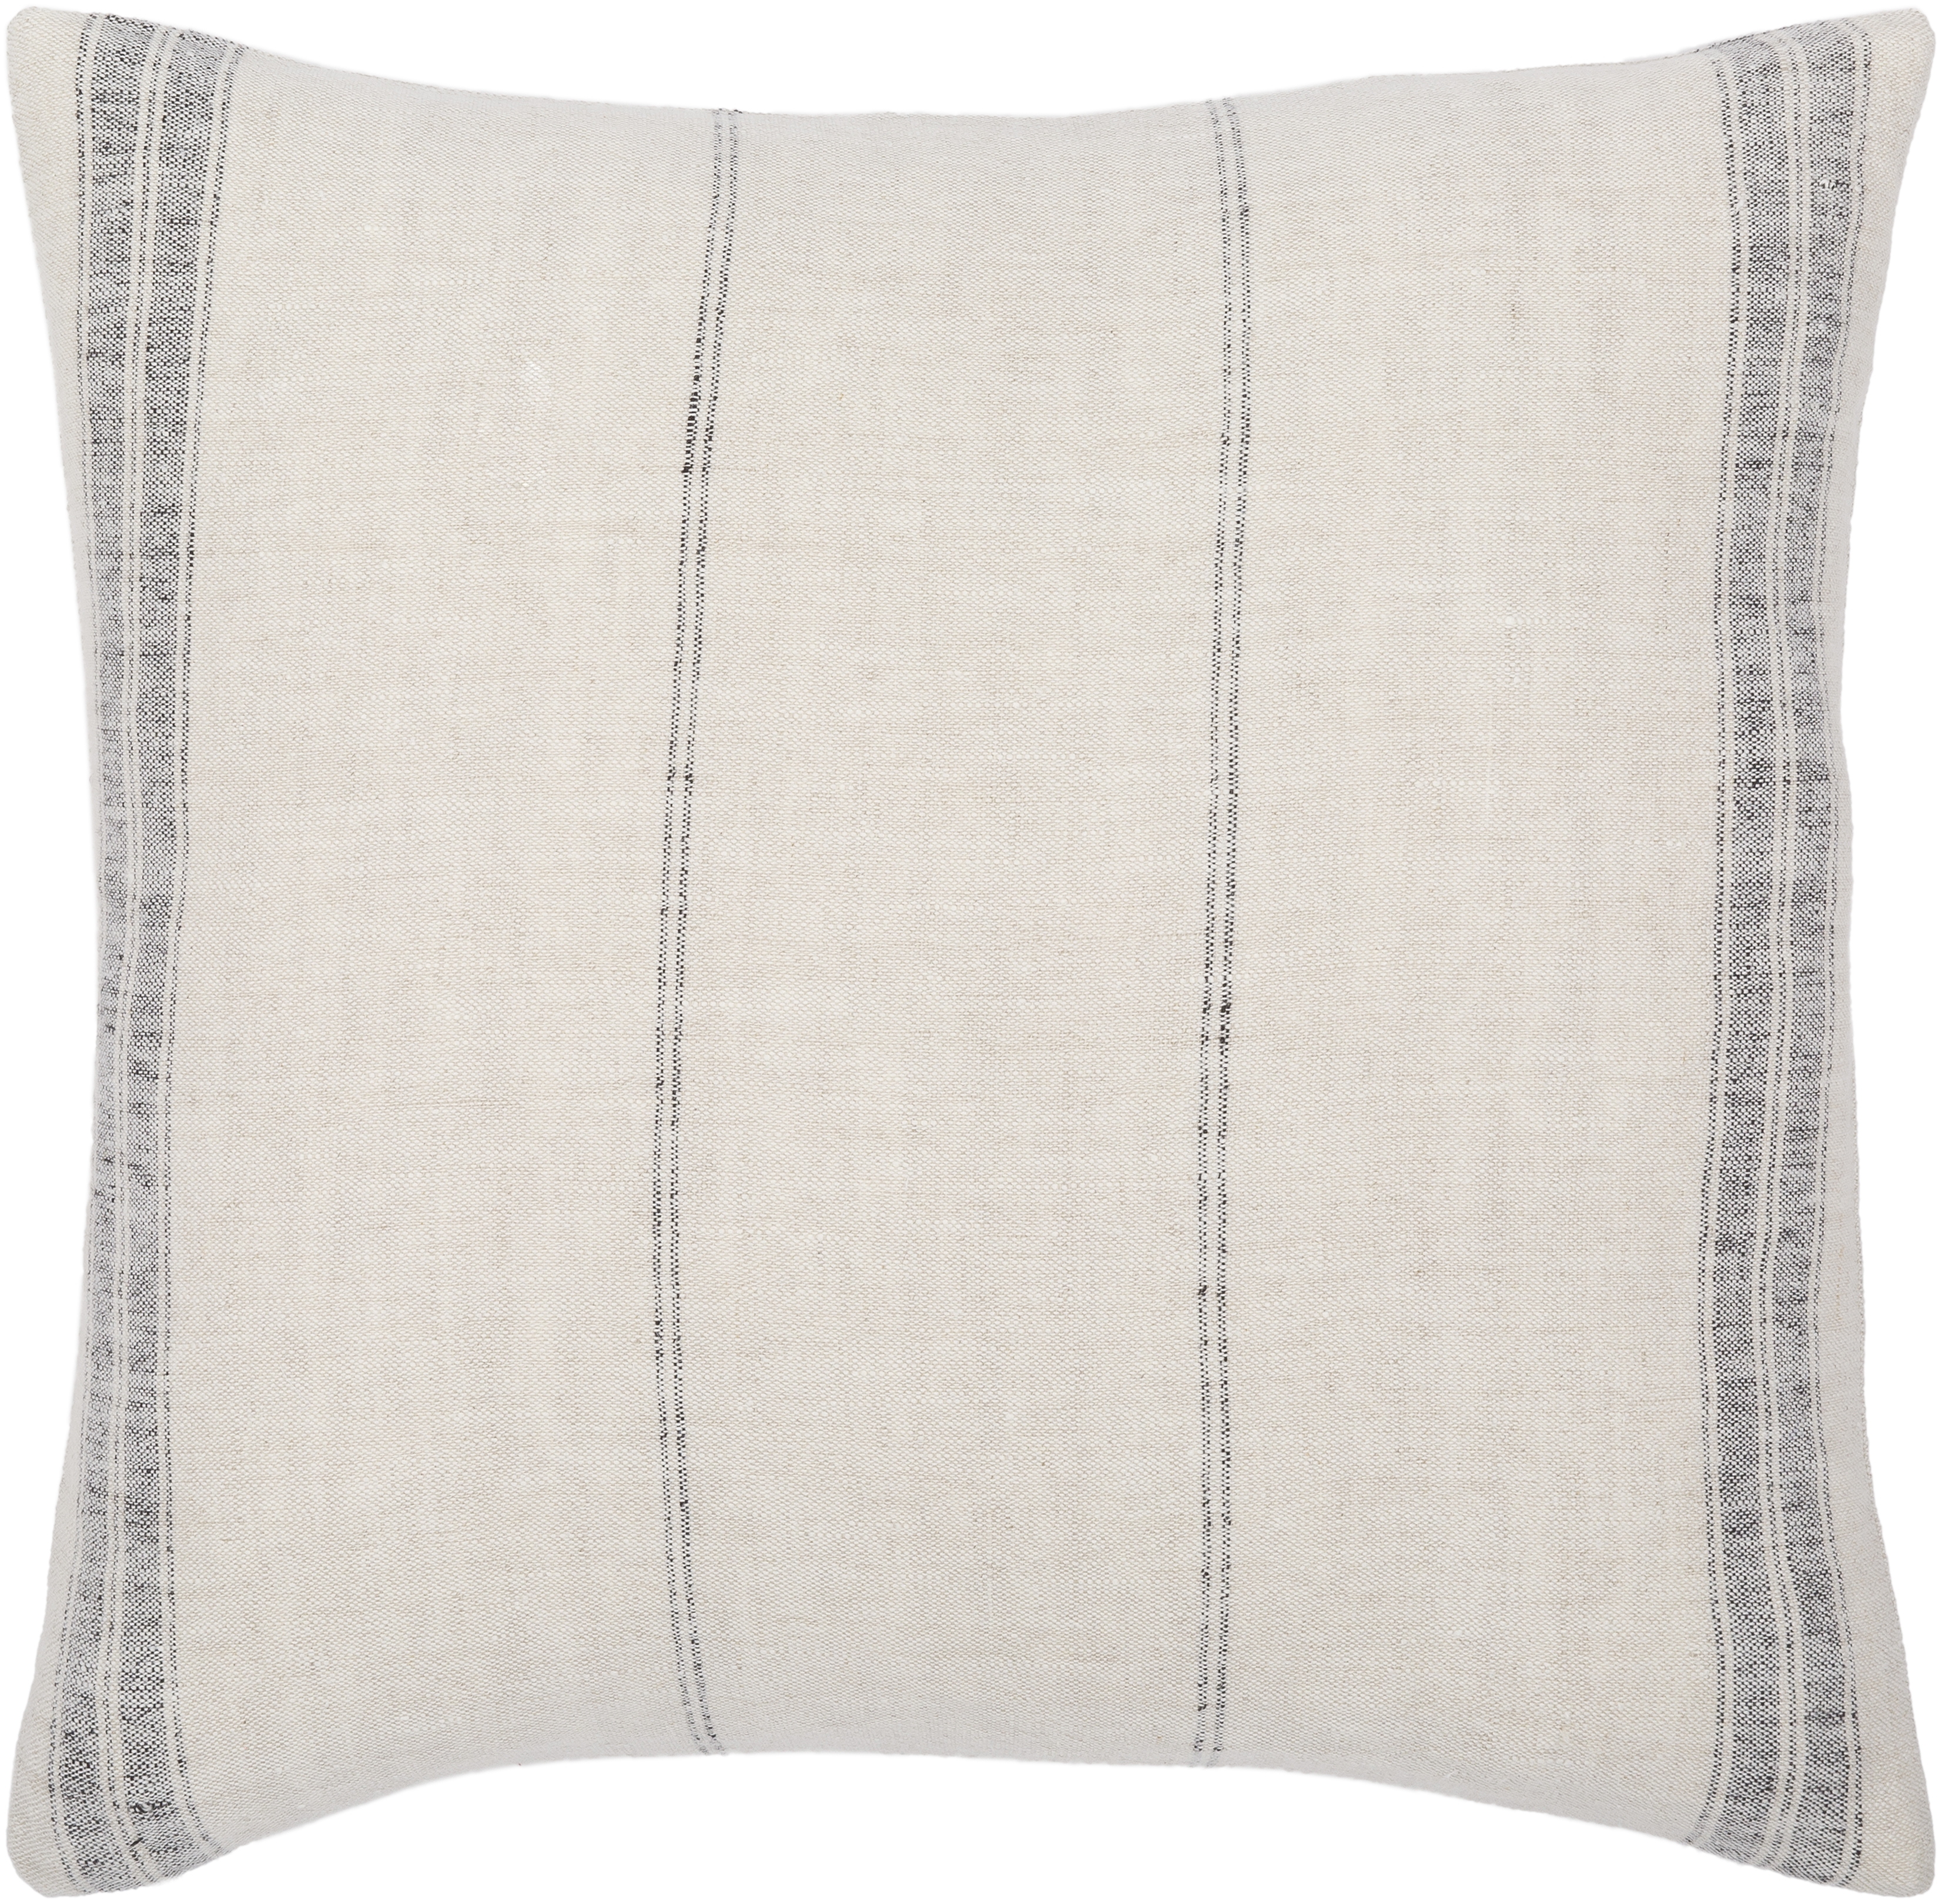 Linen Stripe Vintage Throw Pillow, Small, pillow cover only - Image 1